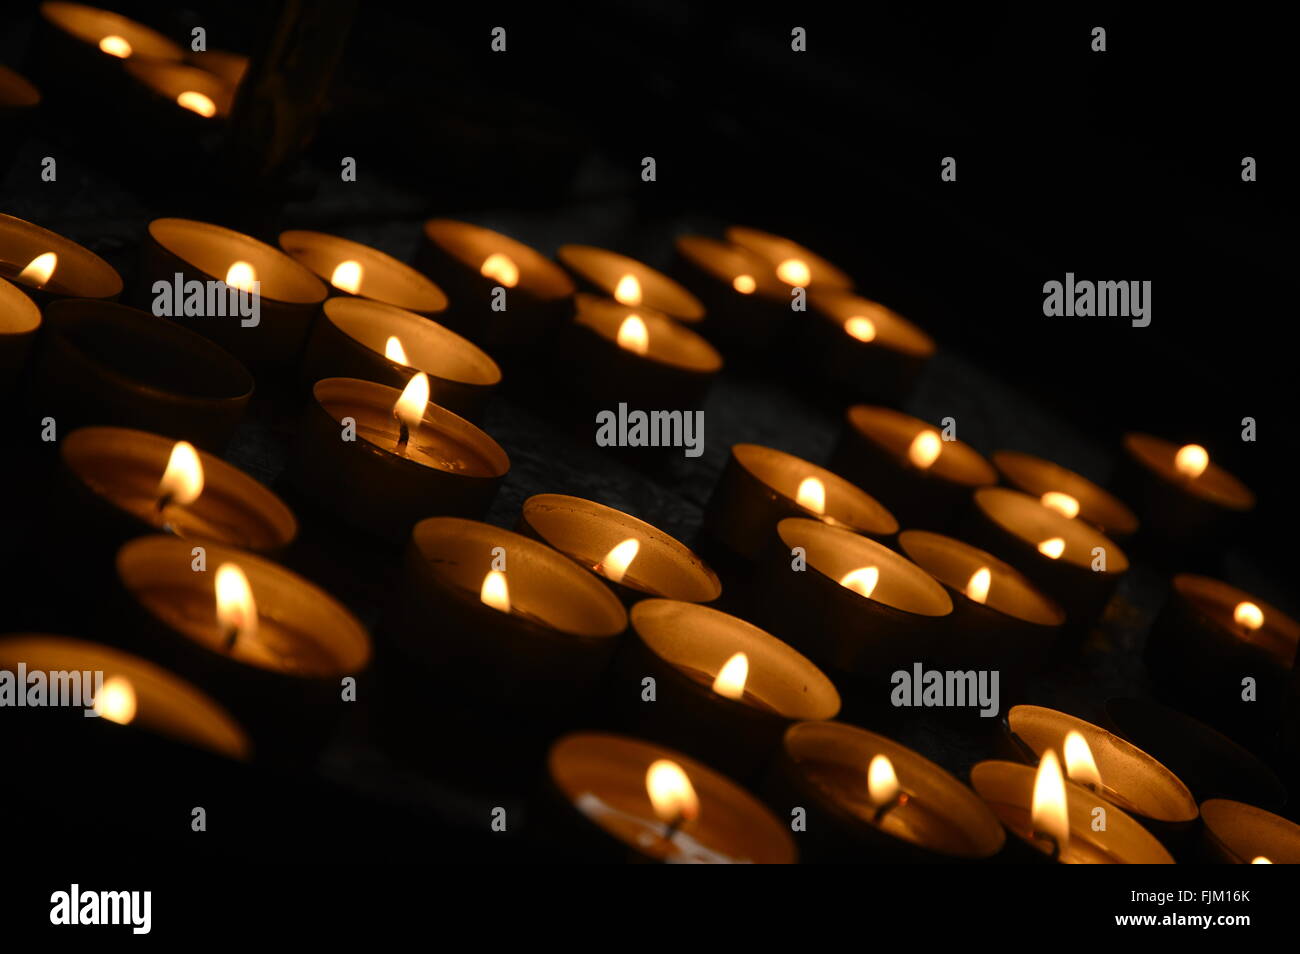 Votive candles against a black background Stock Photo